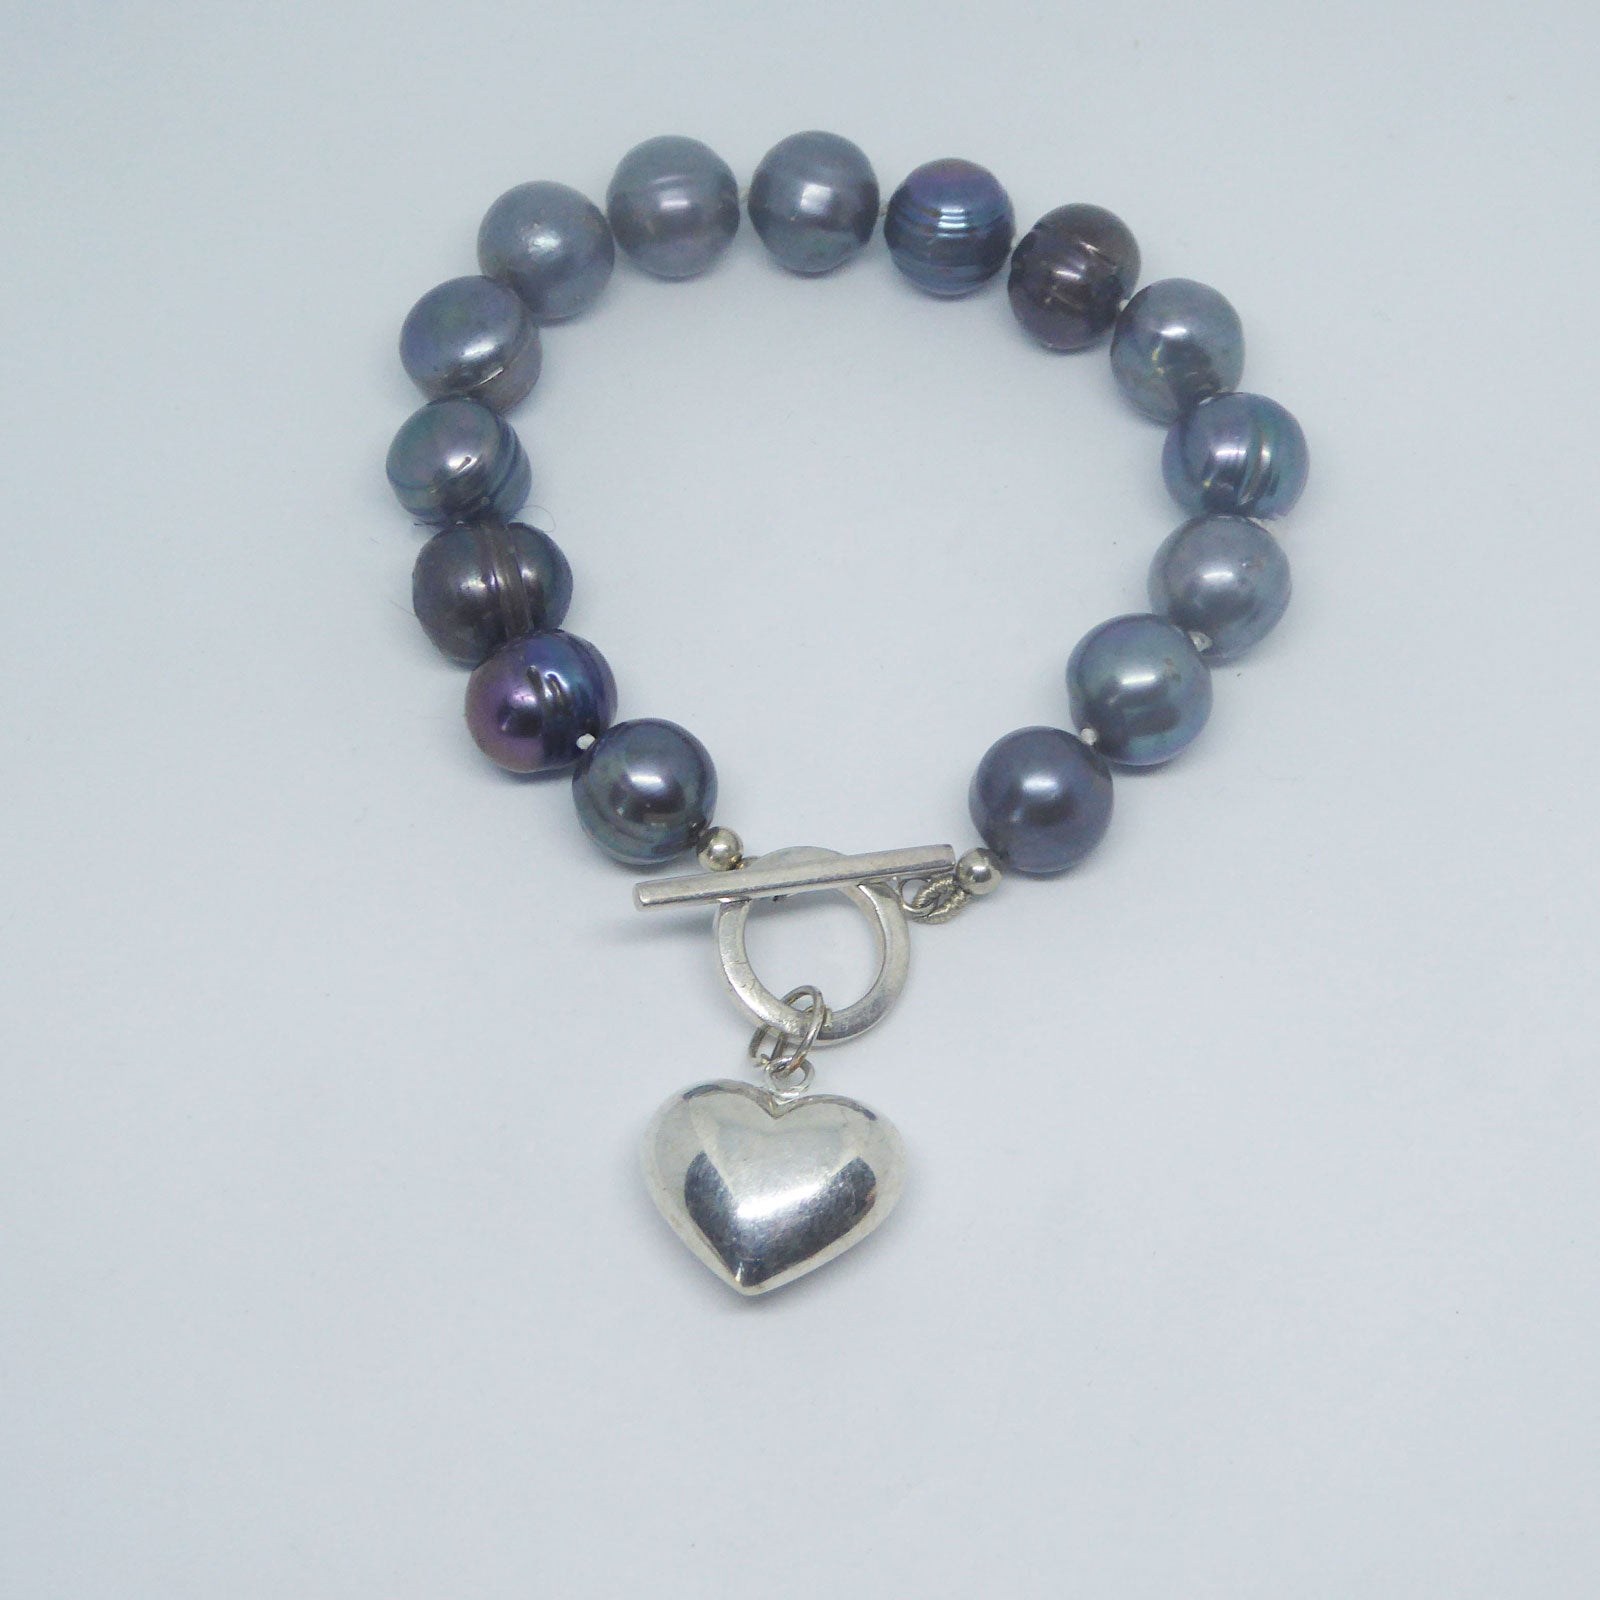 Peacock freshwater pearls & silver heart charm